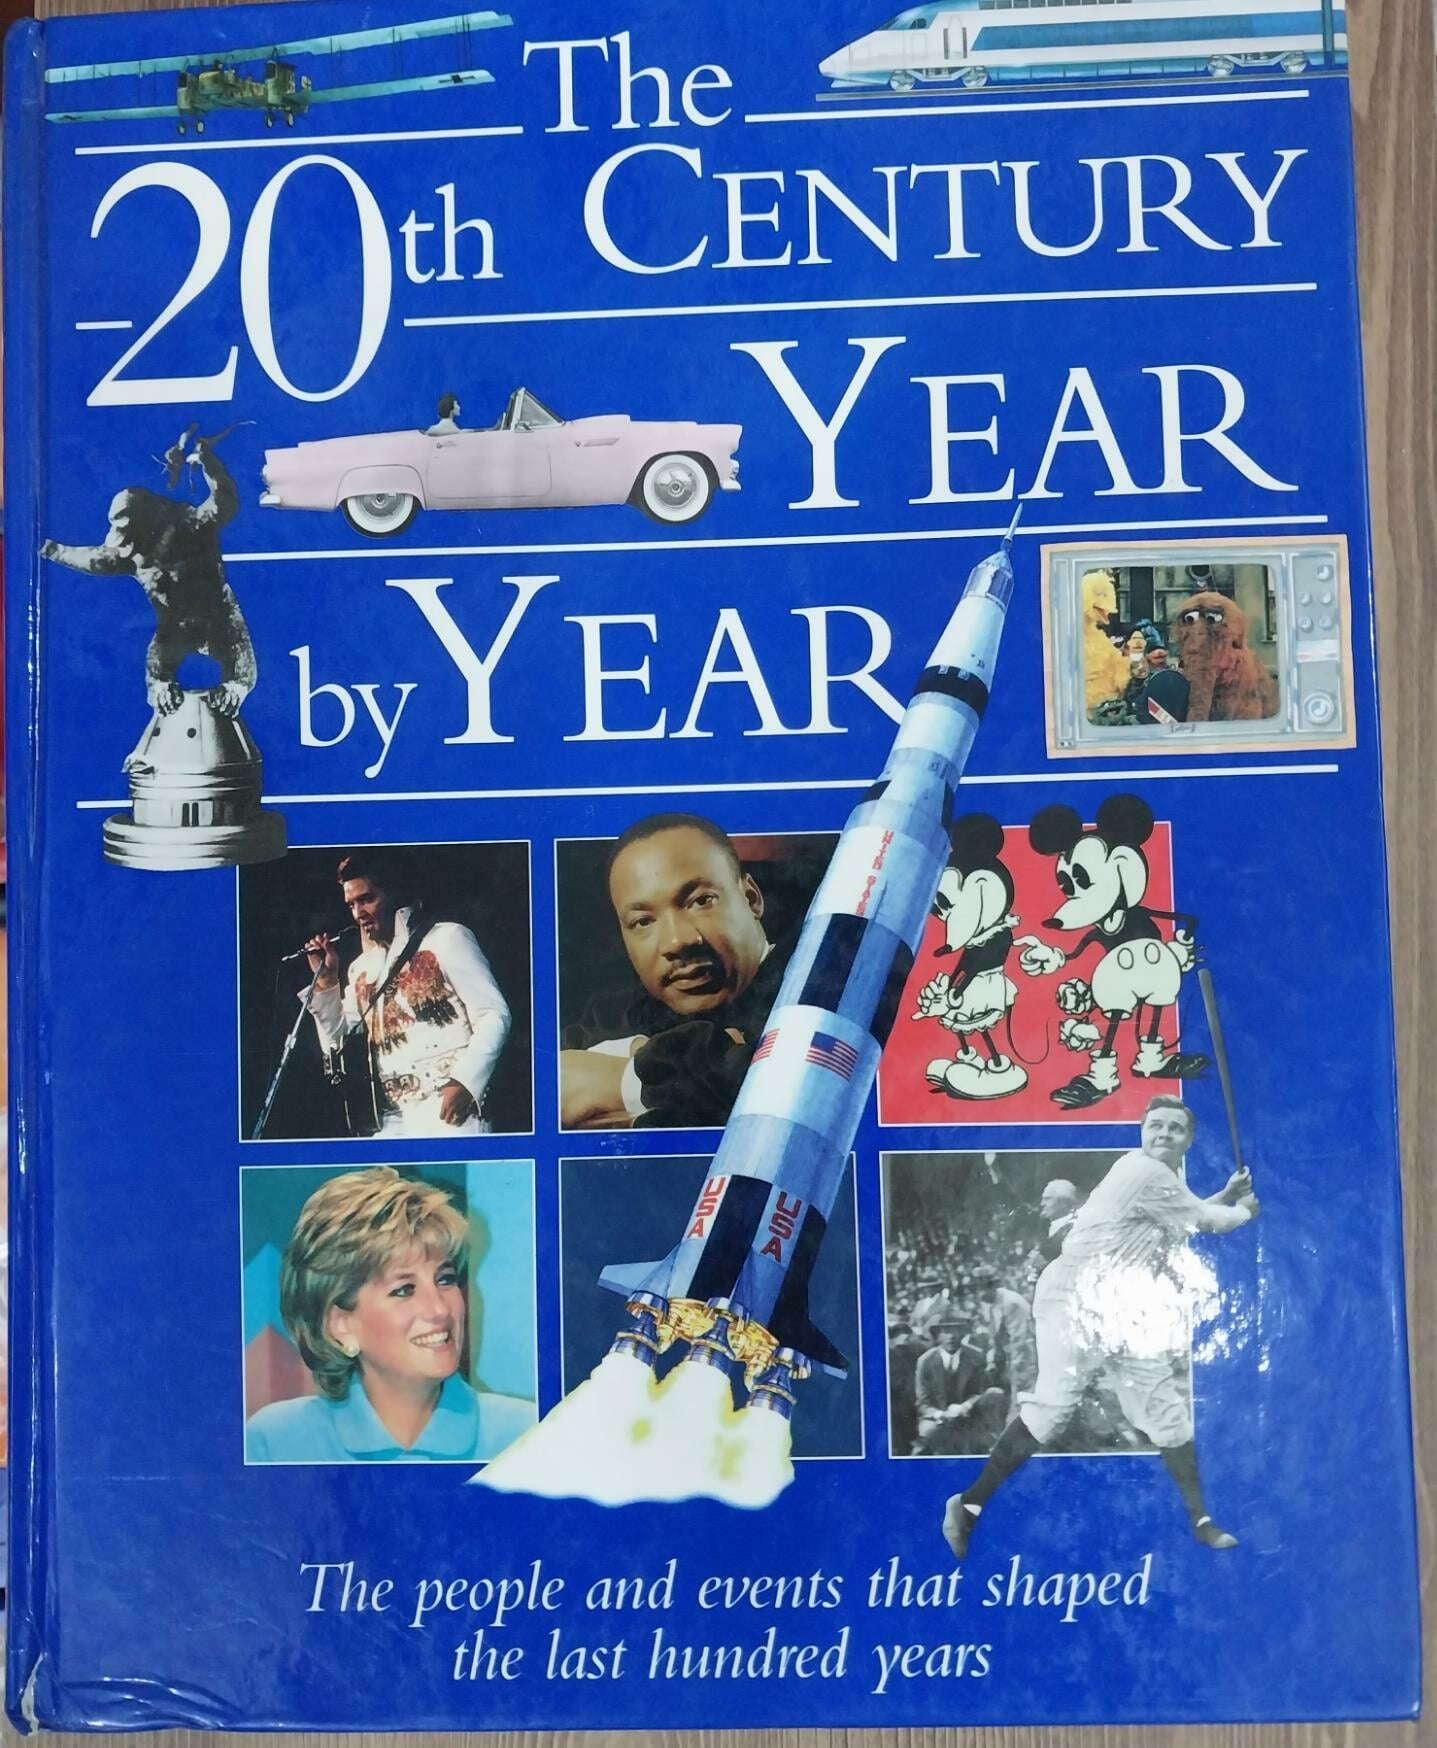 The 20th Century Year by Year - The people and events that shaped the last hundred yesrs